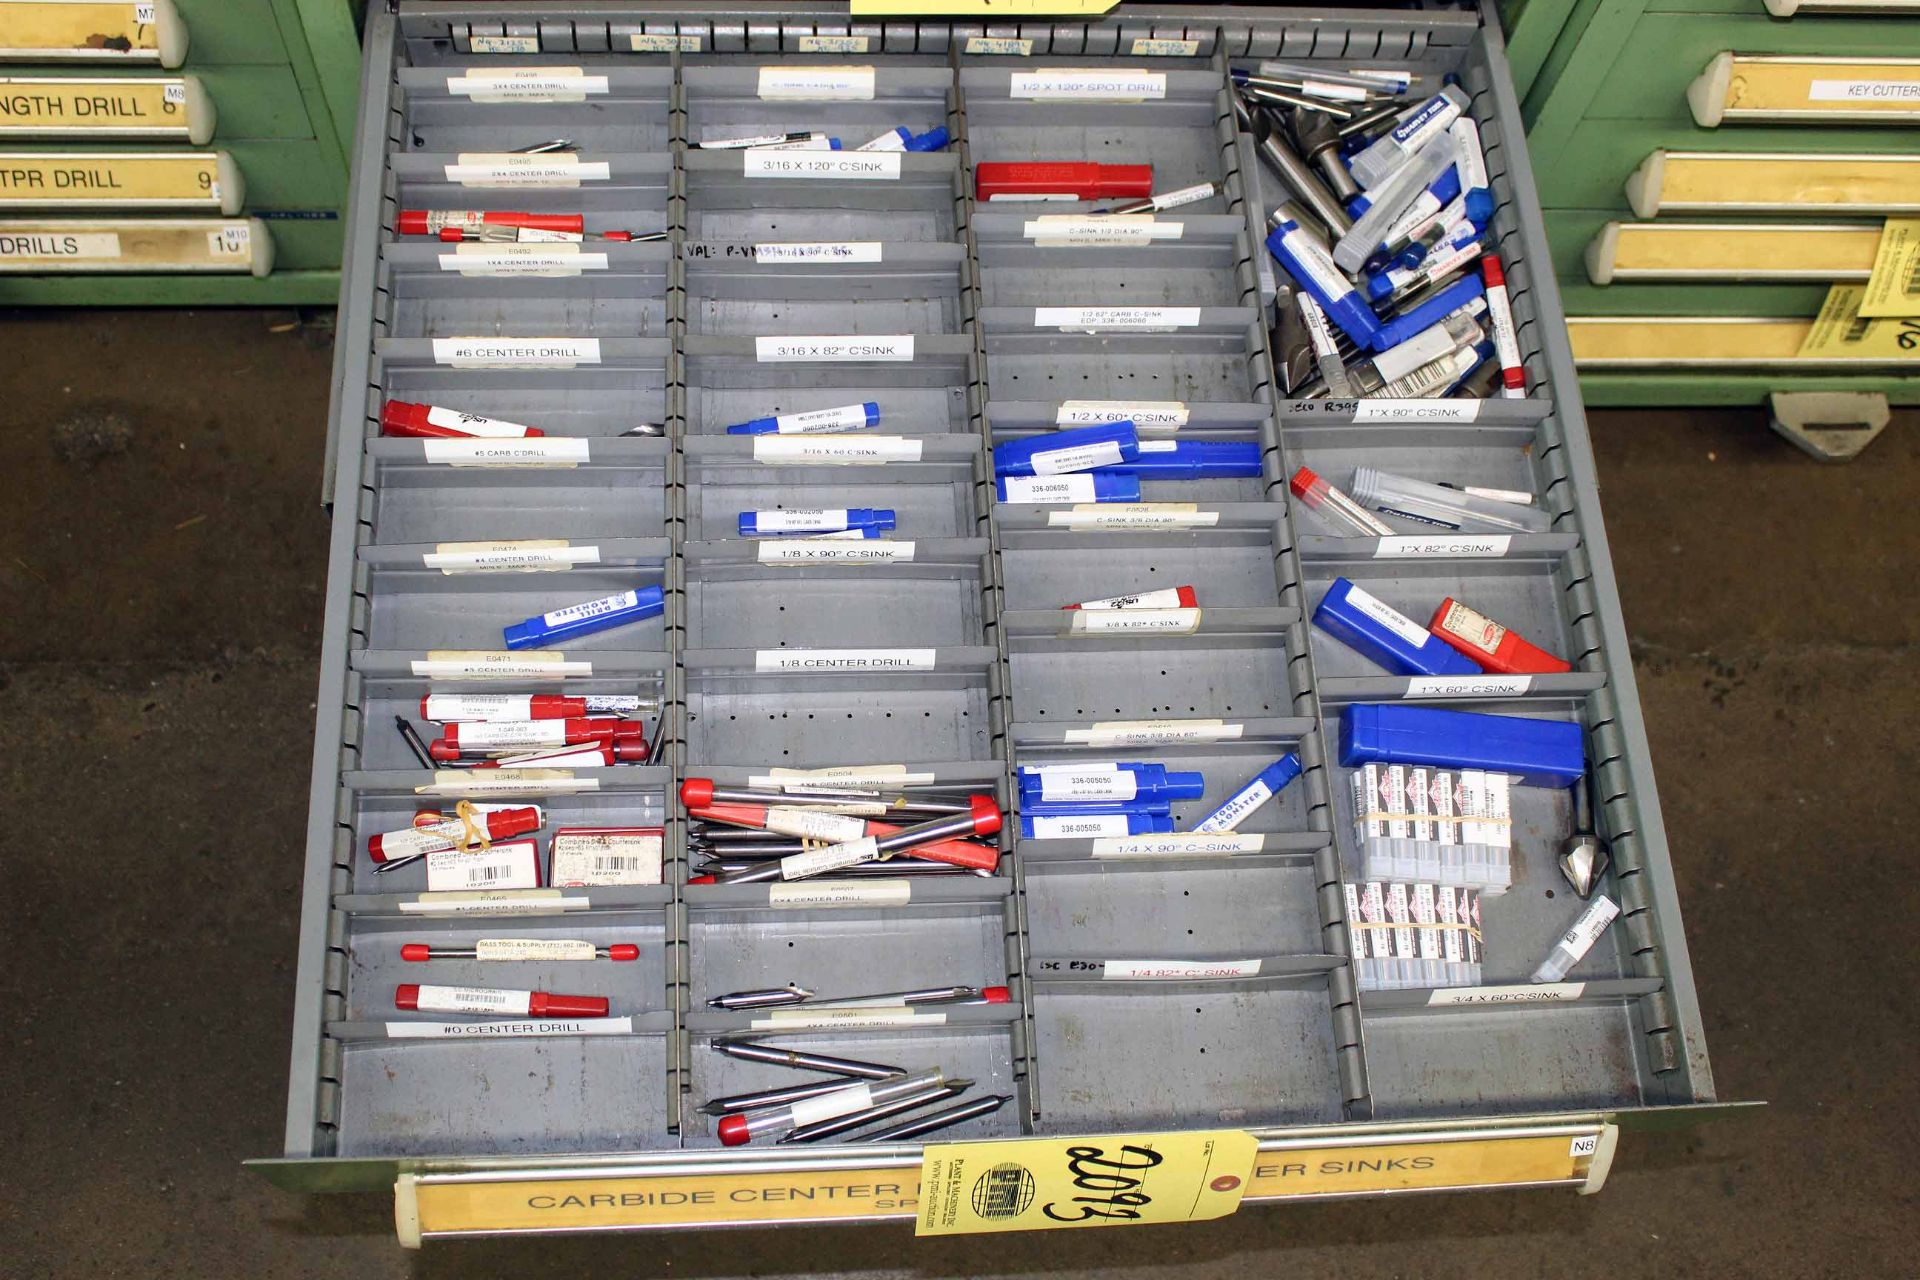 LOT CONSISTING OF: center drills, countersinks (in one drawer)